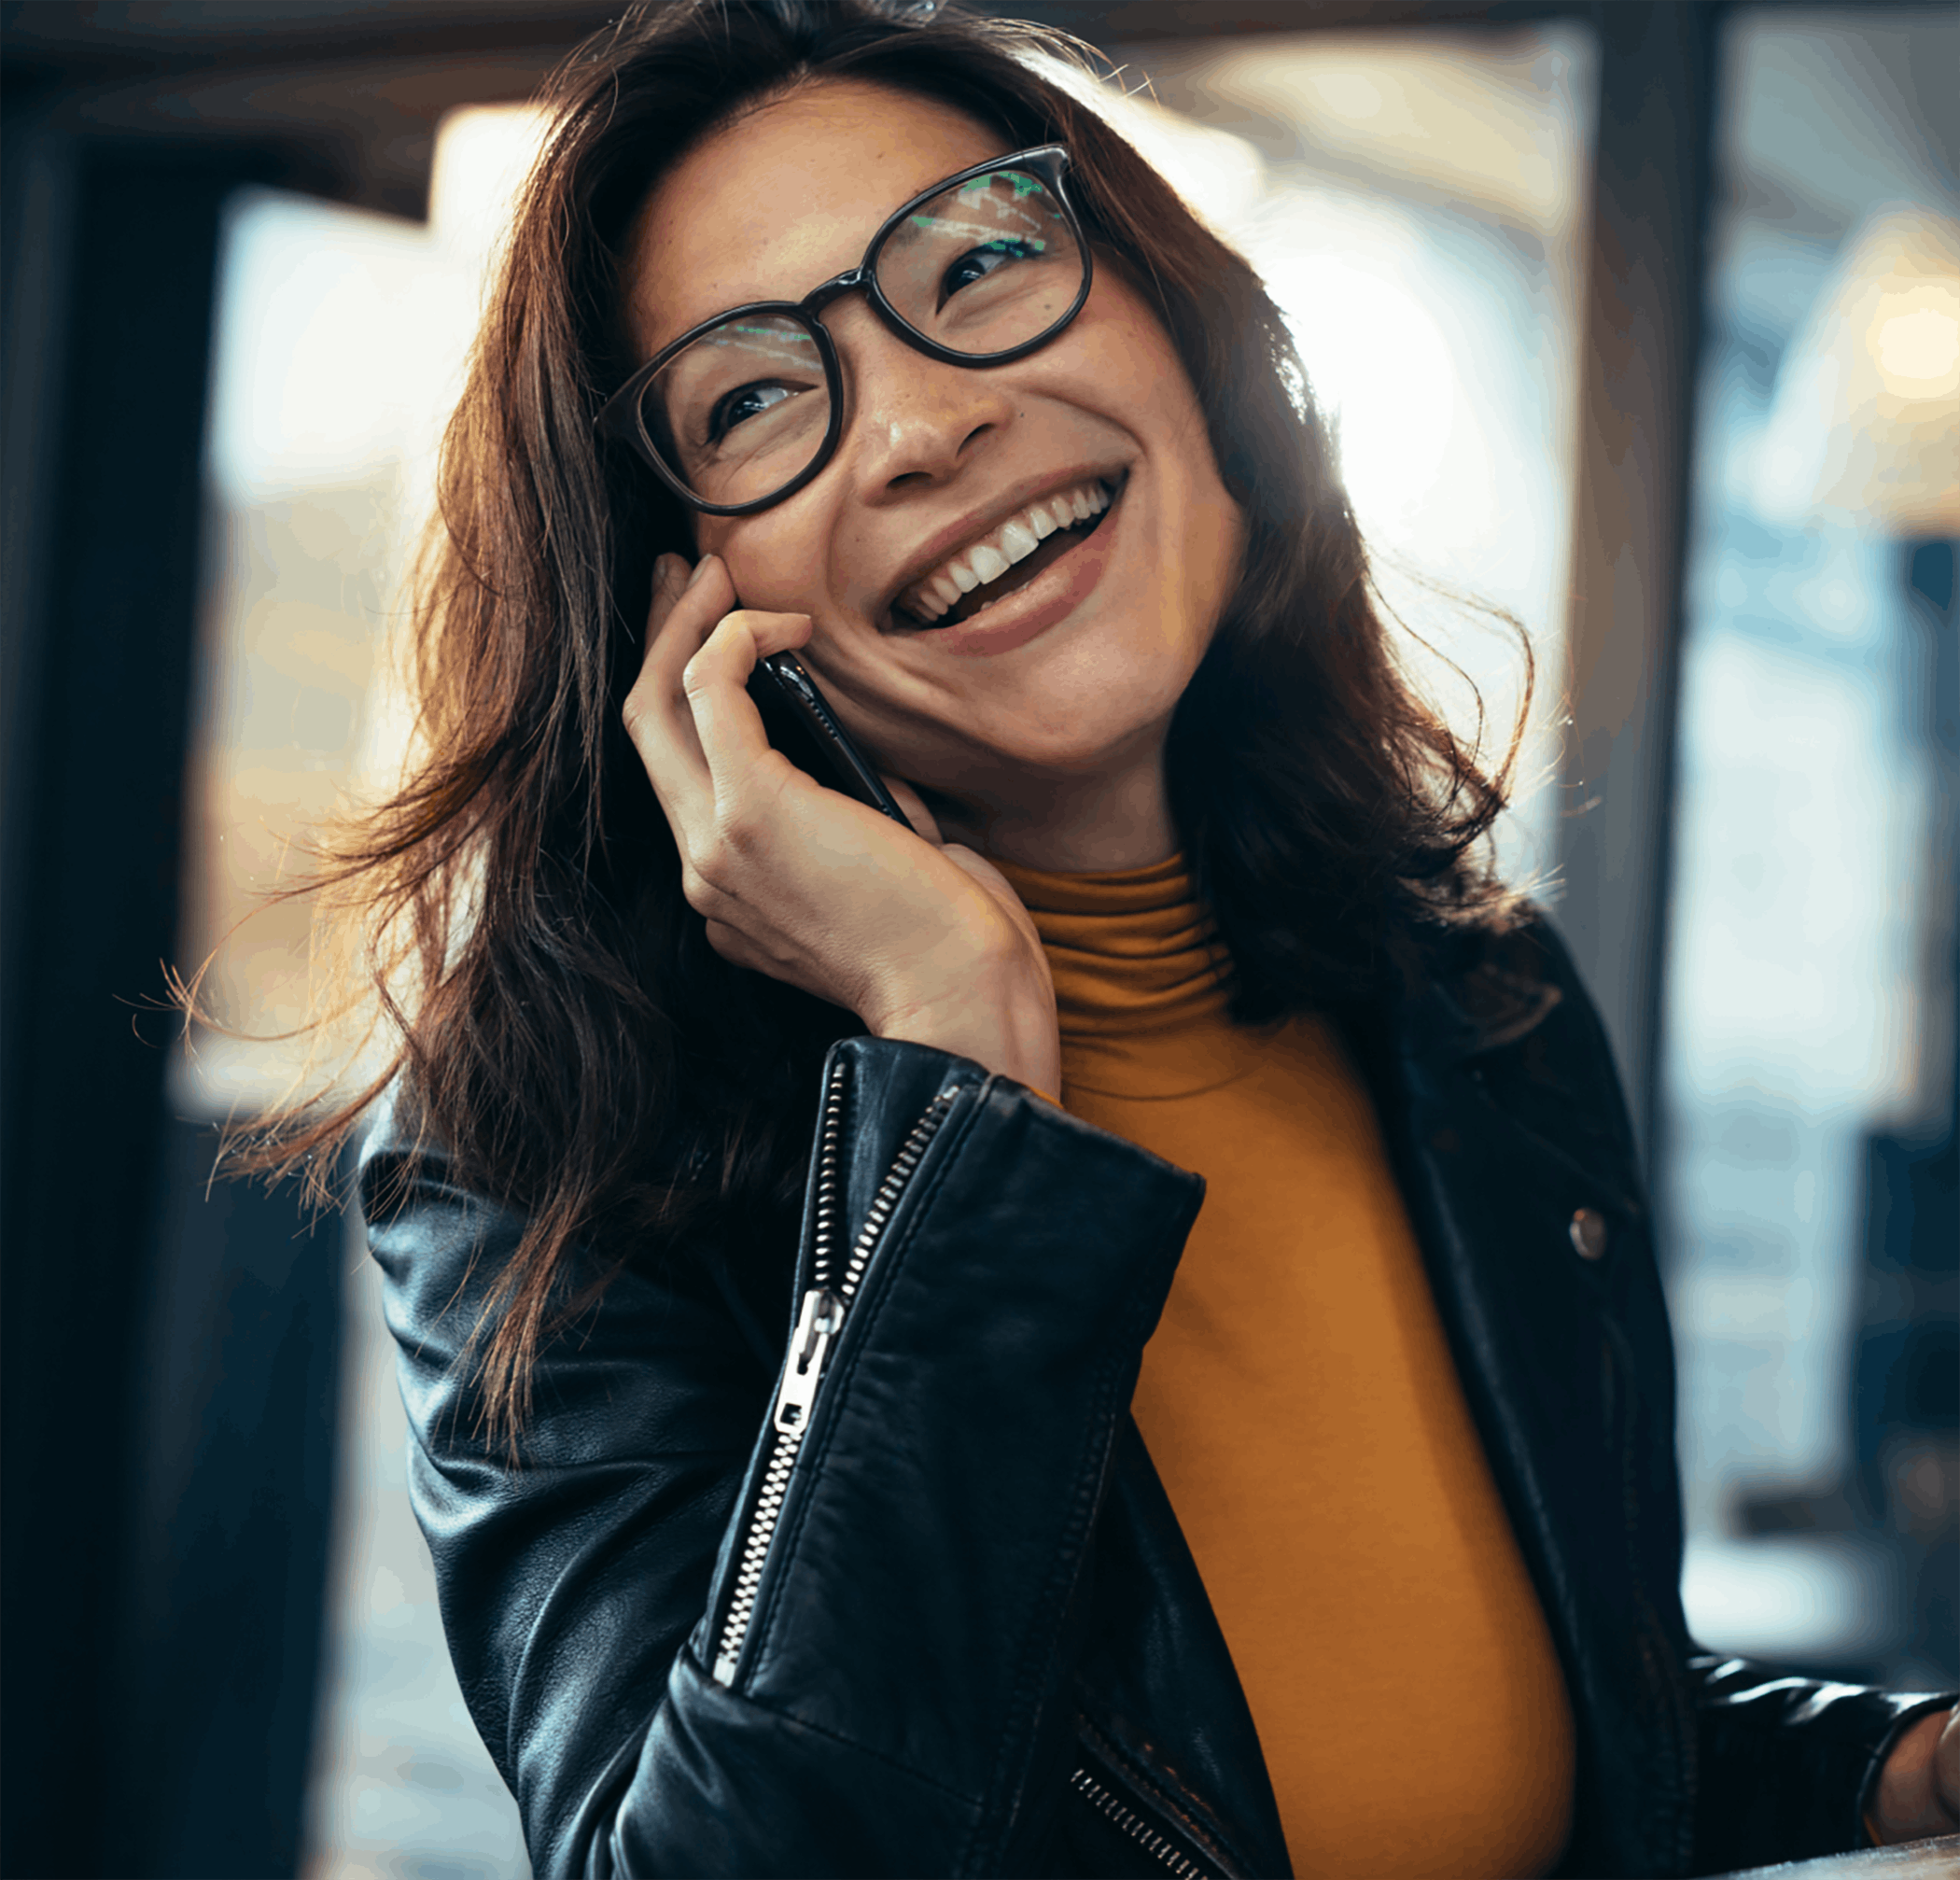 woman with glasses smiling and talking on the phone